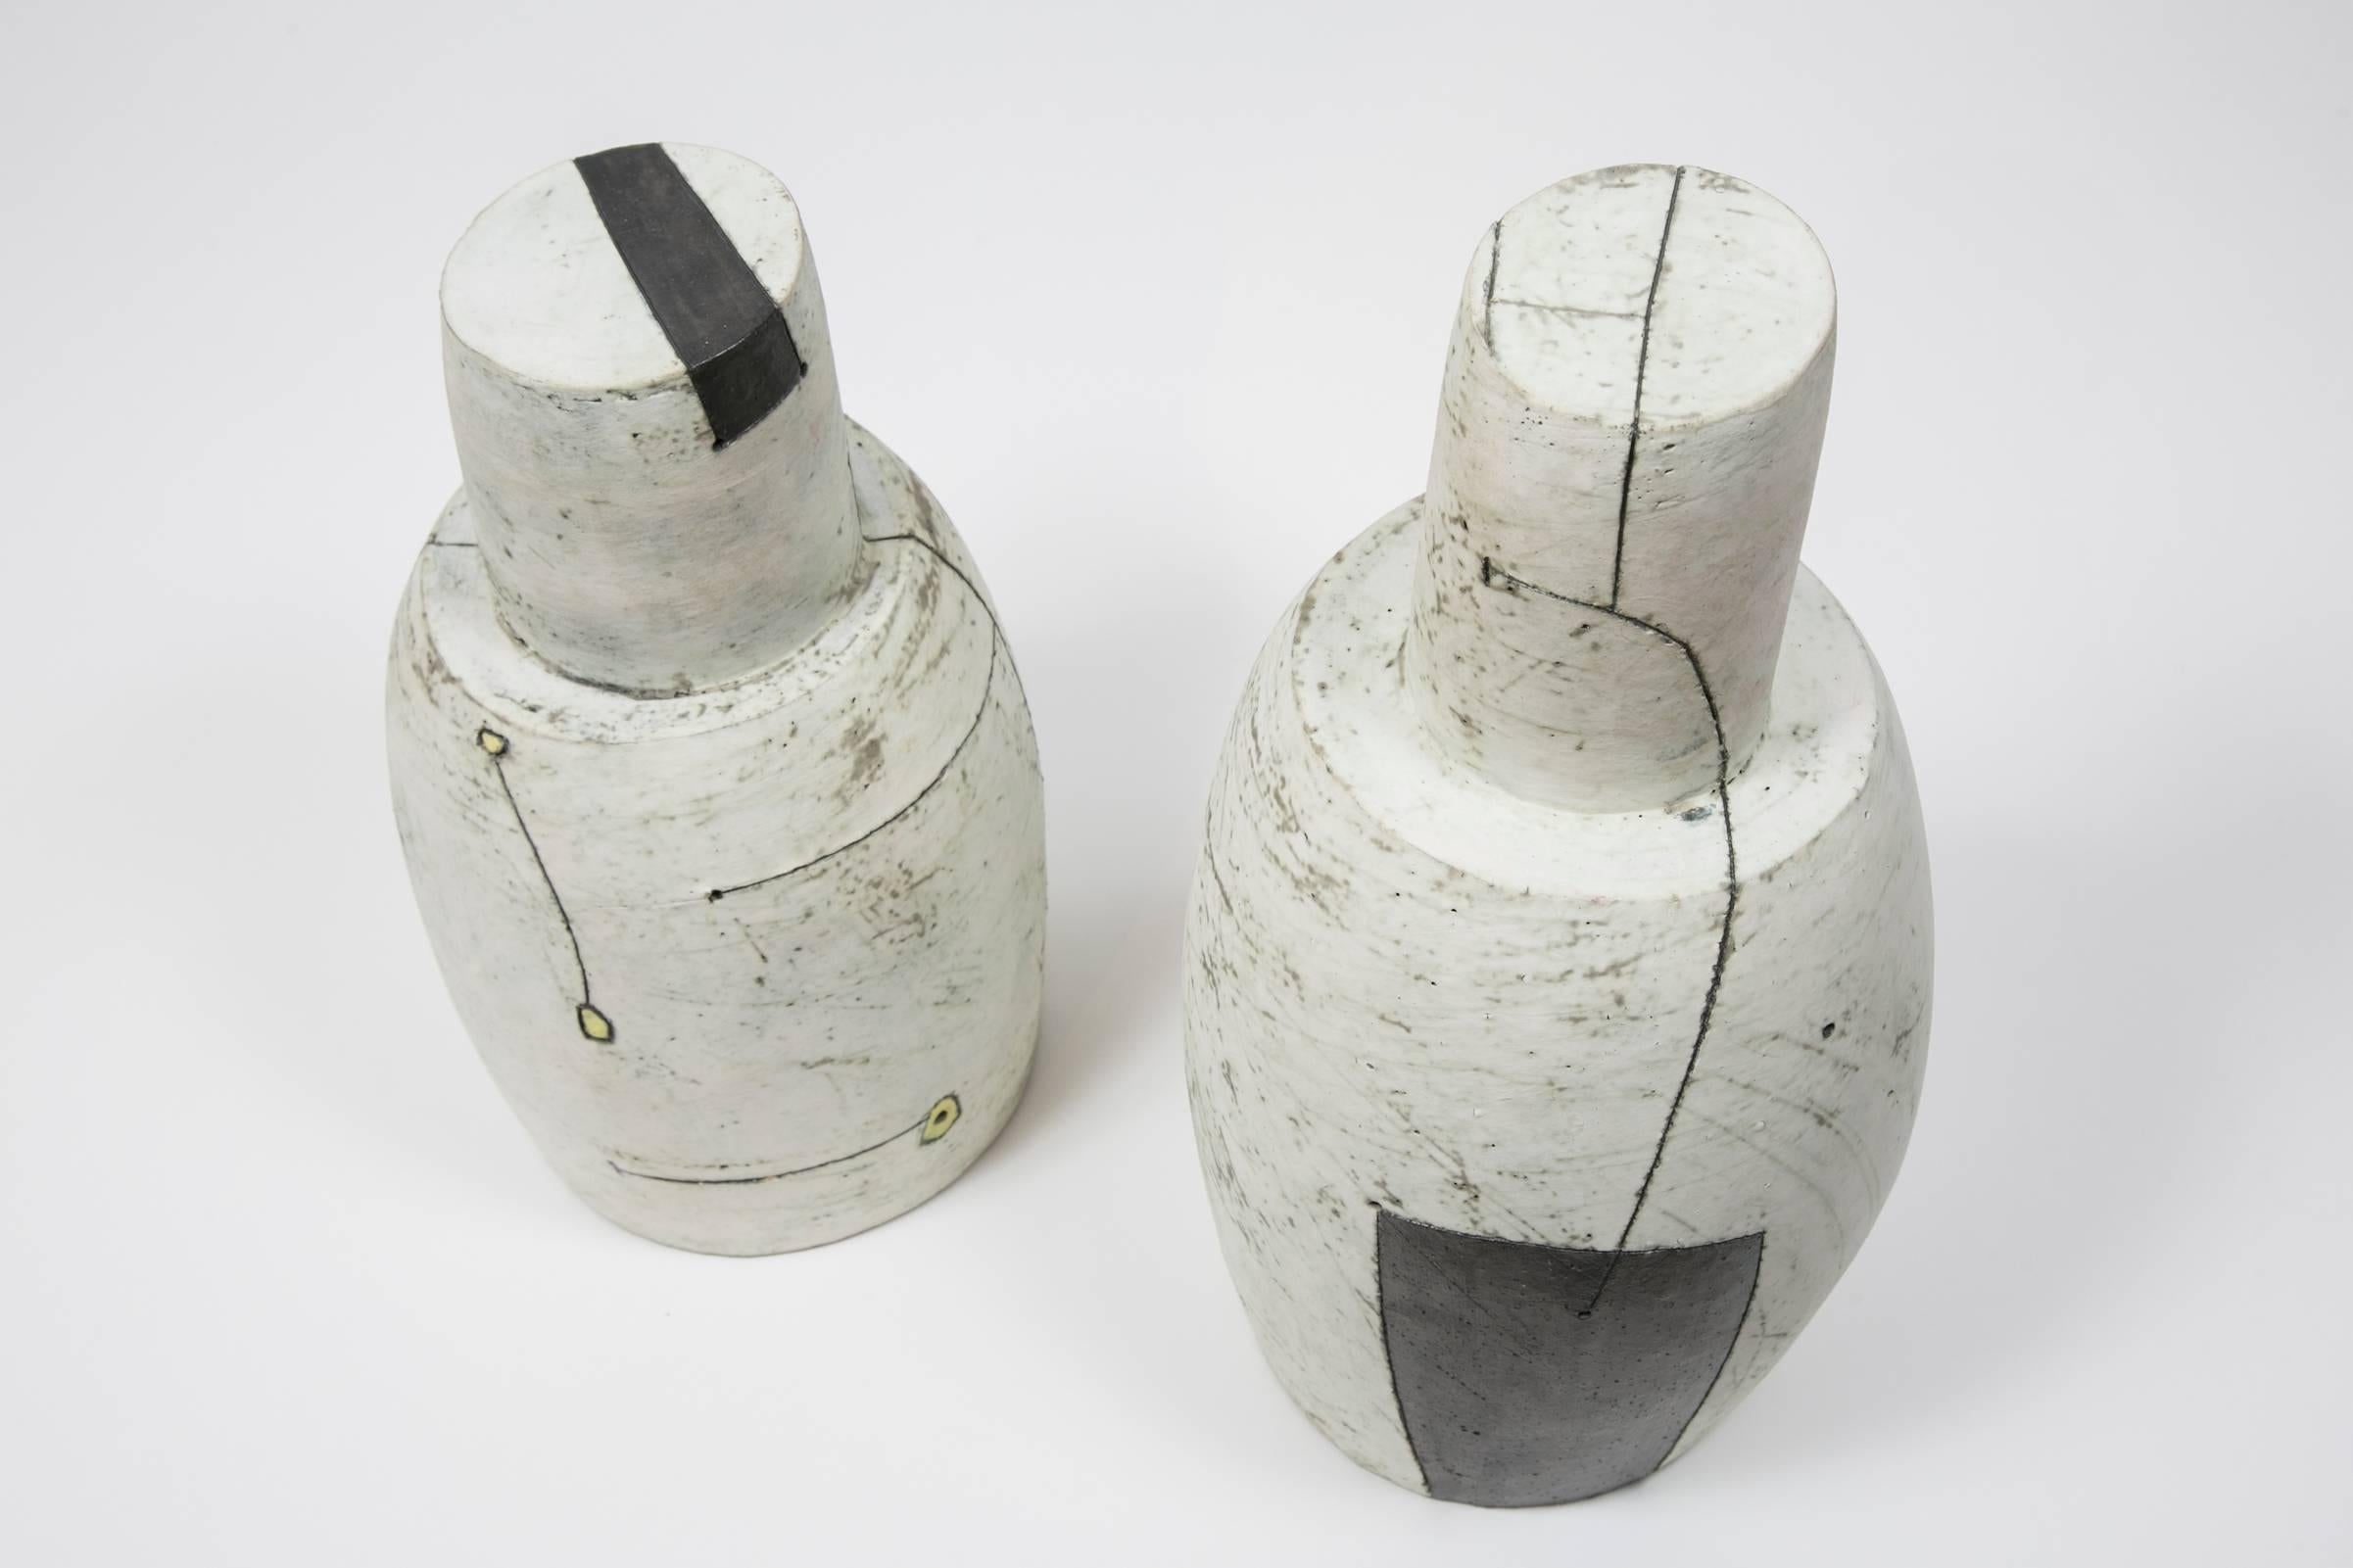 Daphne Corregan was born in 1954 in Pittsburgh.
She came to France in 1971 to study artistic disciplines.
Now she is a professor at the Monaco School of Fine Arts.
Her specialty is ceramics, but she also works with bronze and glass.
She has